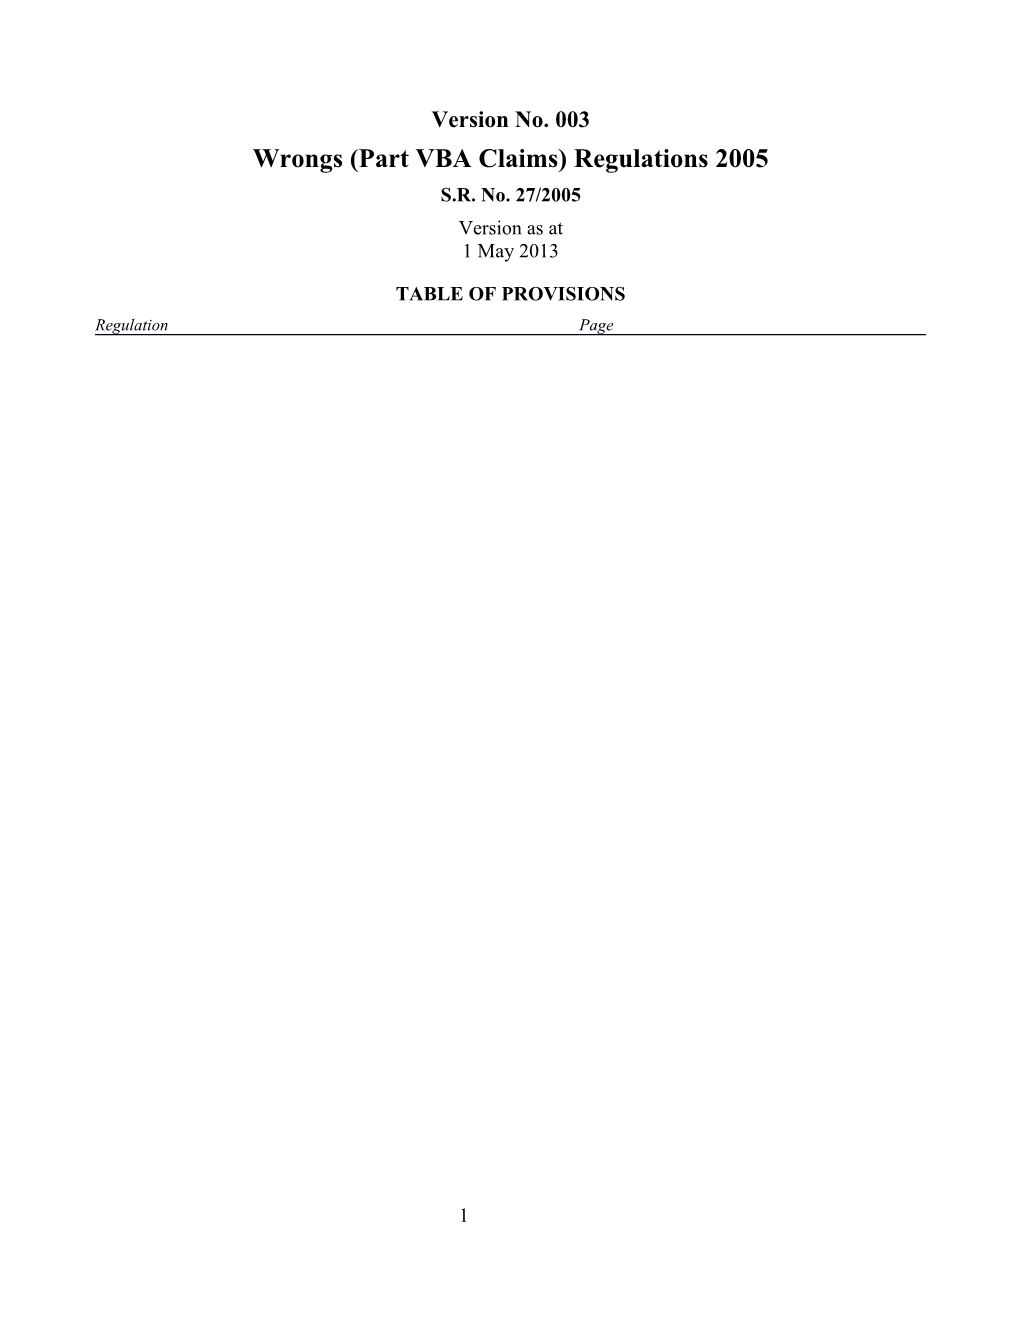 Wrongs (Part VBA Claims) Regulations 2005